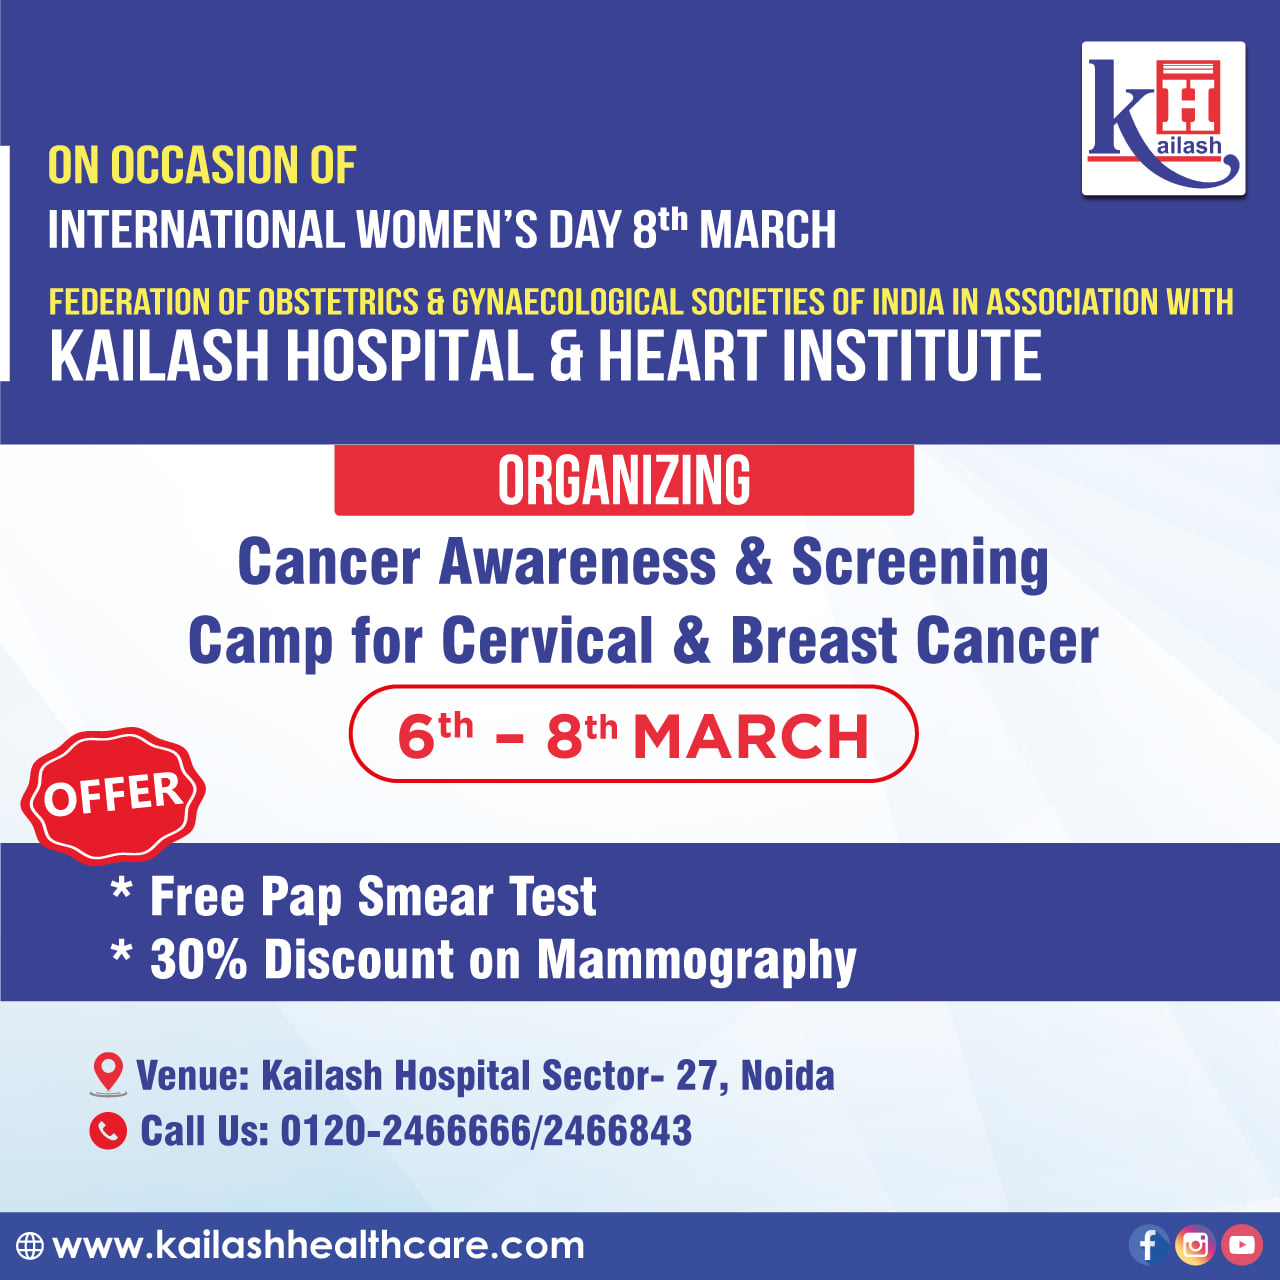 On occasion of International Women's Day, FOGSI (@www.fogsi.org) in association with Kailash Hospital & Heart Institute is organizing a Cancer Awareness & Screening Camp